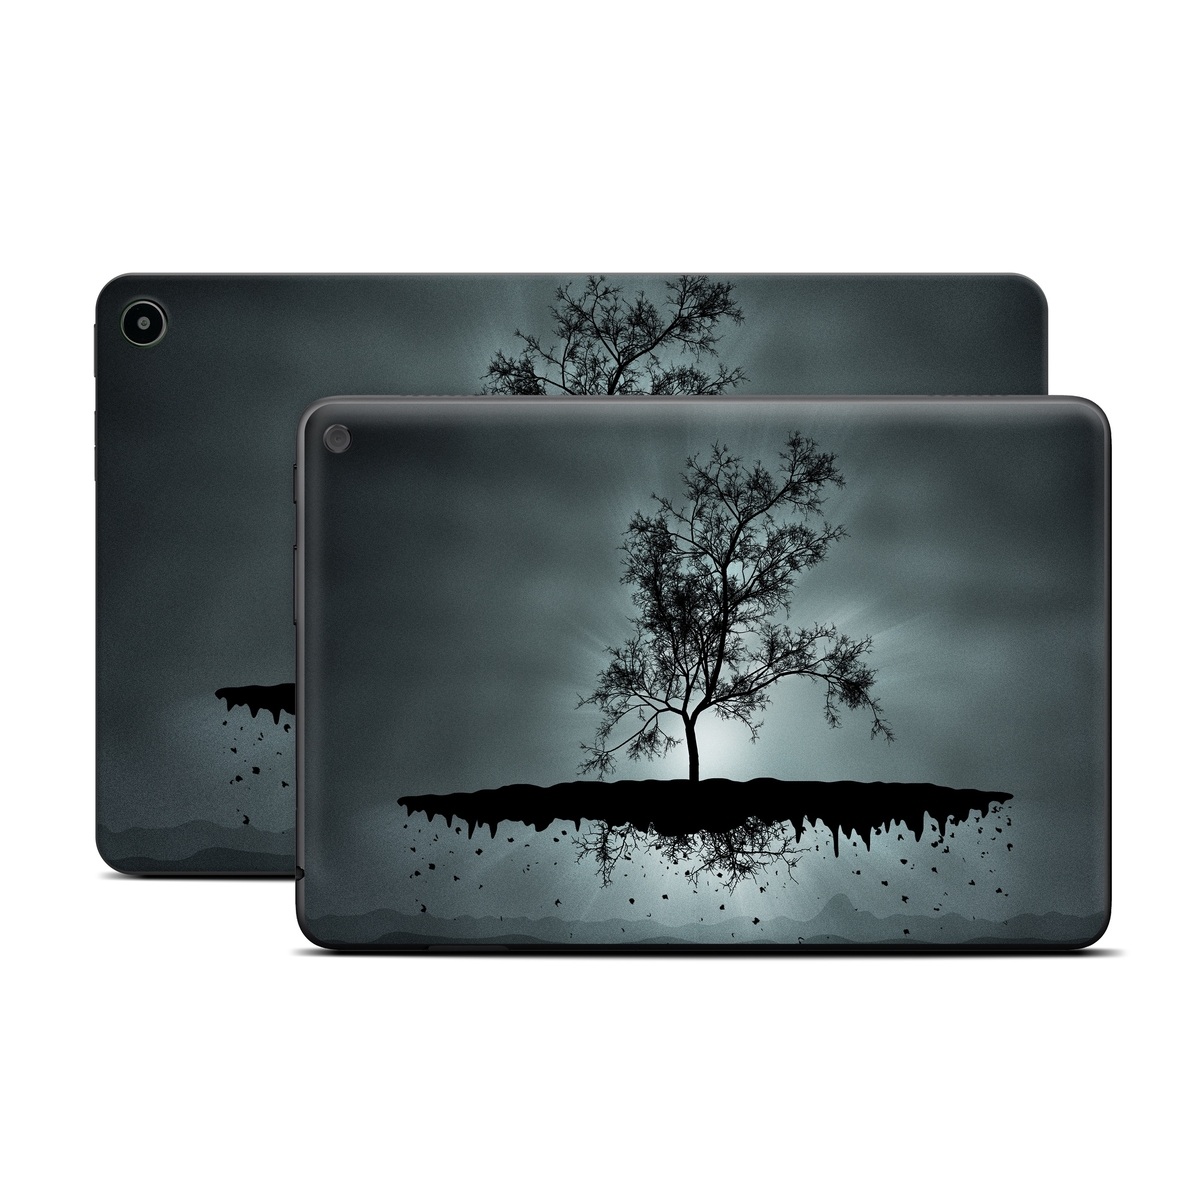 Amazon Fire Tablet Series Skin Skin design of Reflection, Sky, Nature, Water, Black, Tree, Black-and-white, Monochrome photography, Natural landscape, Atmospheric phenomenon, with black, gray, blue colors